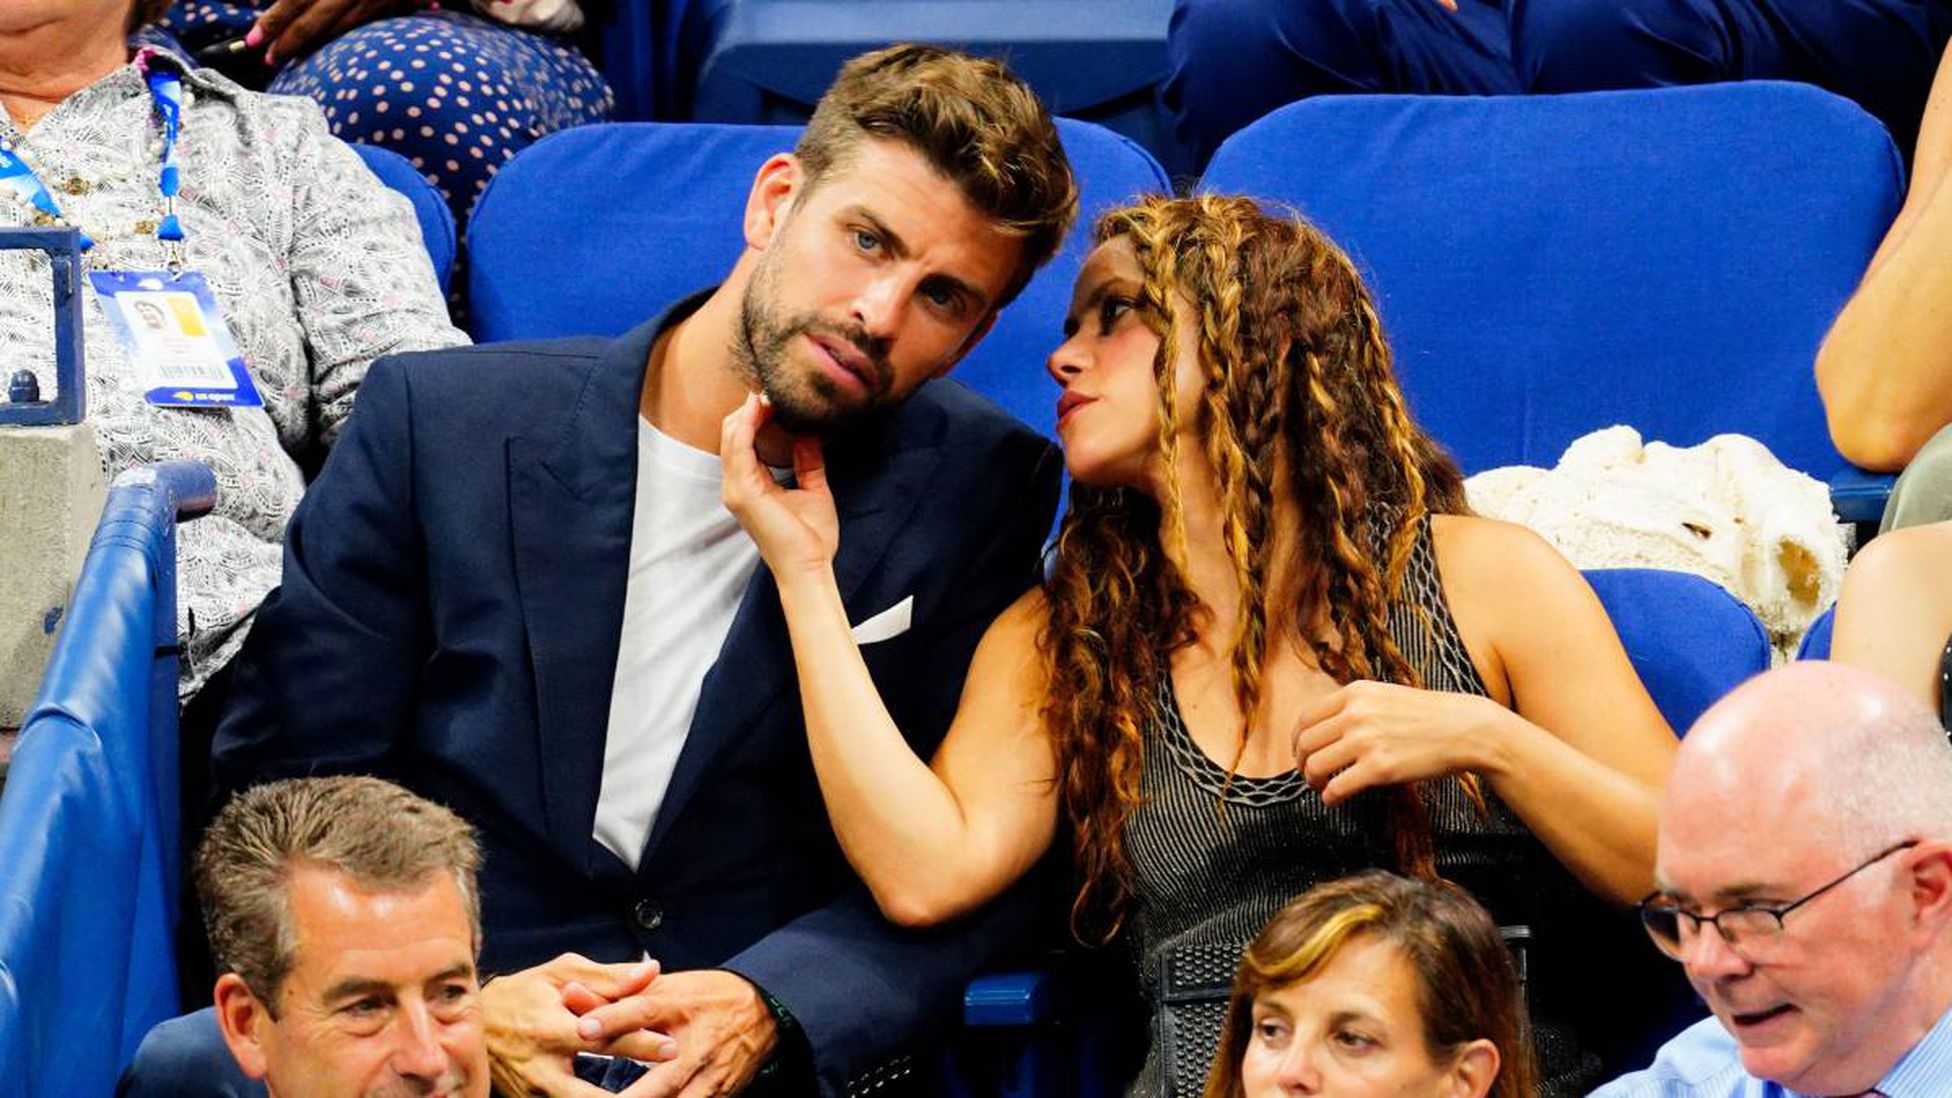 Tension between Gerard Pique and Shakira amid rumours of infidelity - AS USA